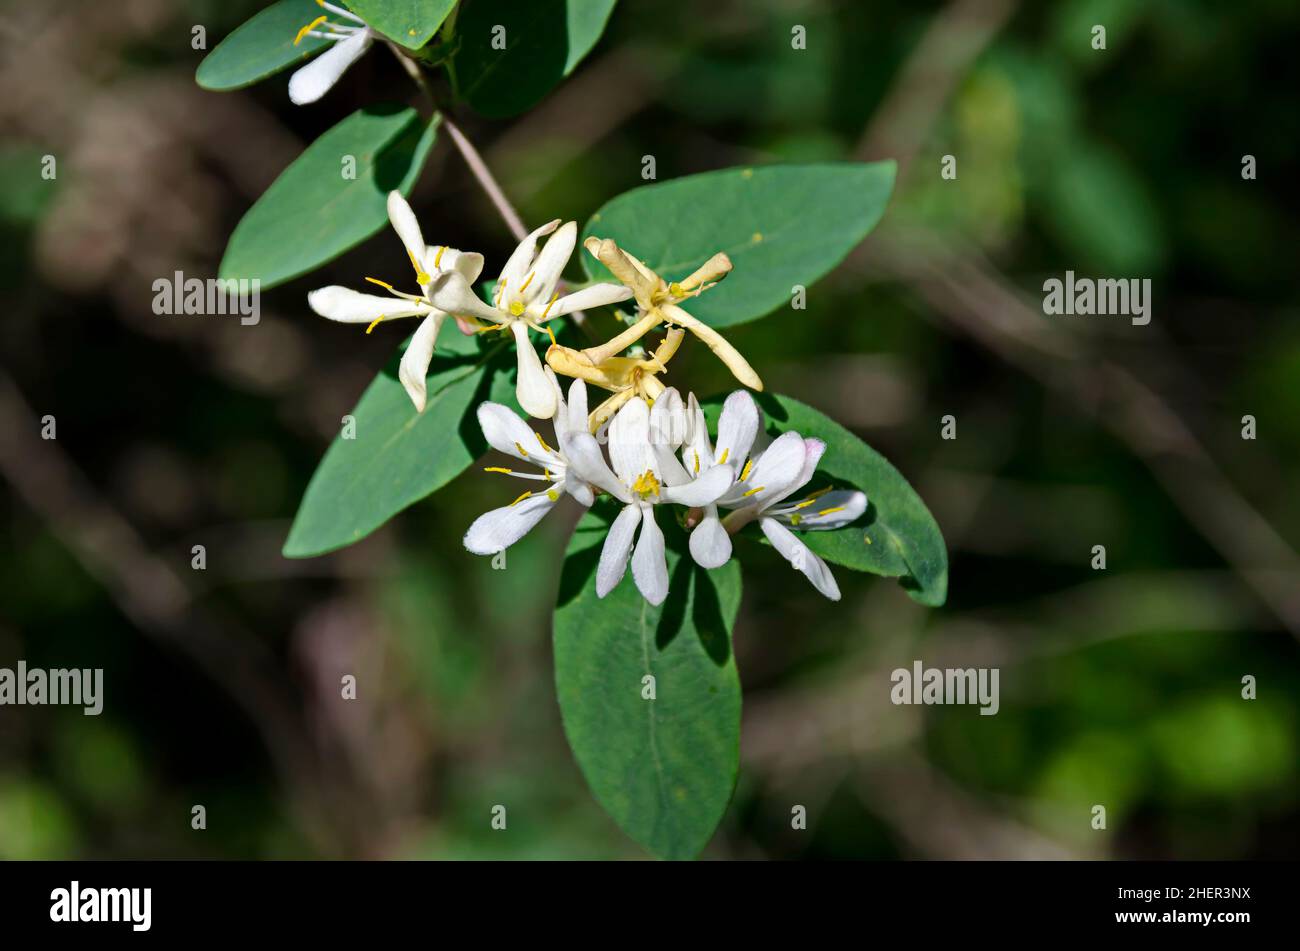 Flowering close up on a branch of honeysuckle, woodbine or Lonicera with a mix of yellow and white flowers, Sofia, Bulgaria Stock Photo